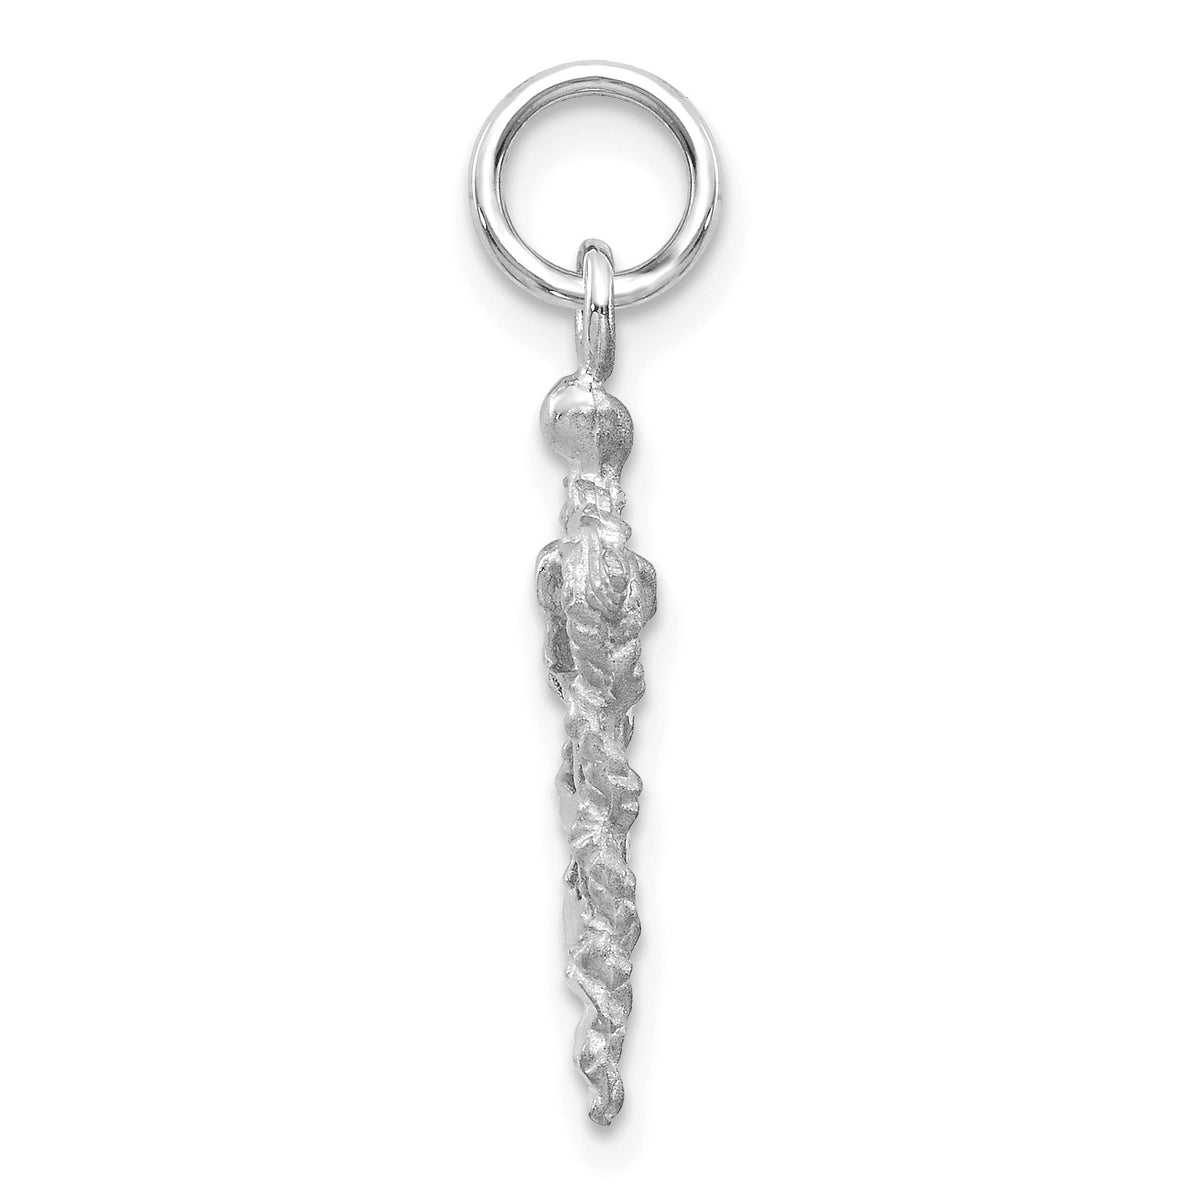 Alternate view of the 14k Yellow or White Gold 3D Caduceus Charm or Pendant, 11 x 26mm by The Black Bow Jewelry Co.